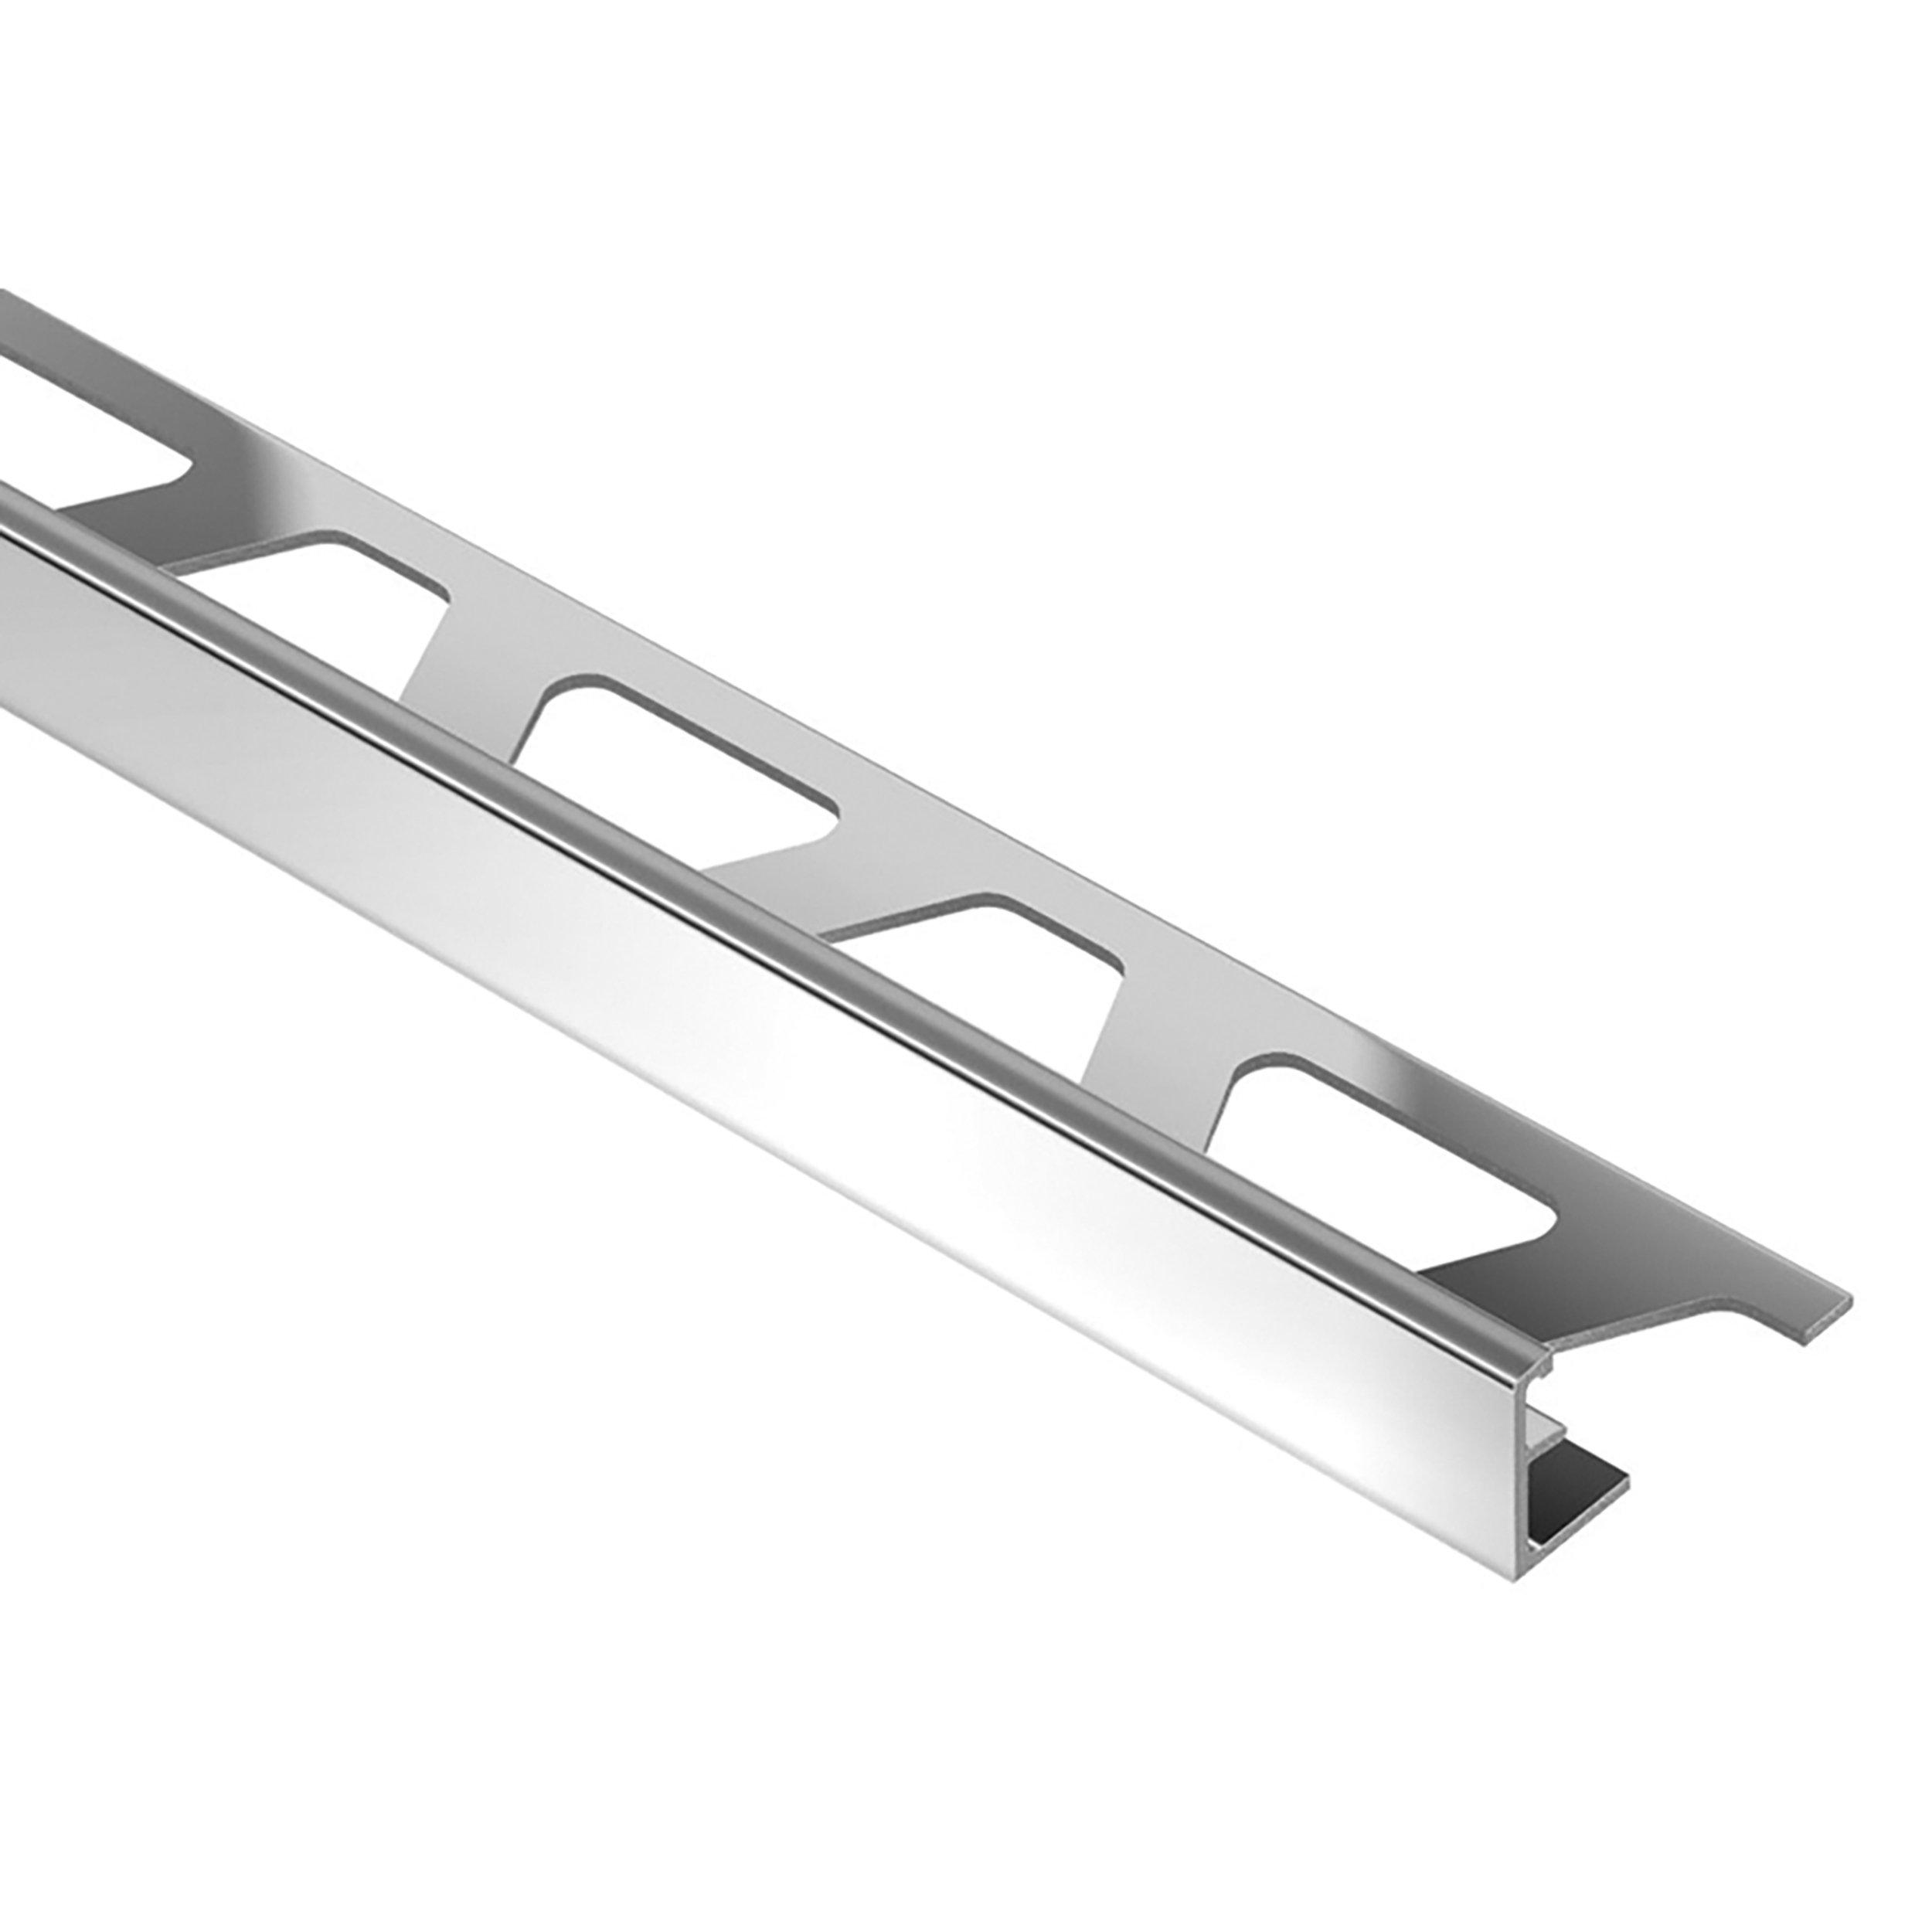 Schluter Jolly Edge Trim 1/2in. Aluminum Polished Chrome